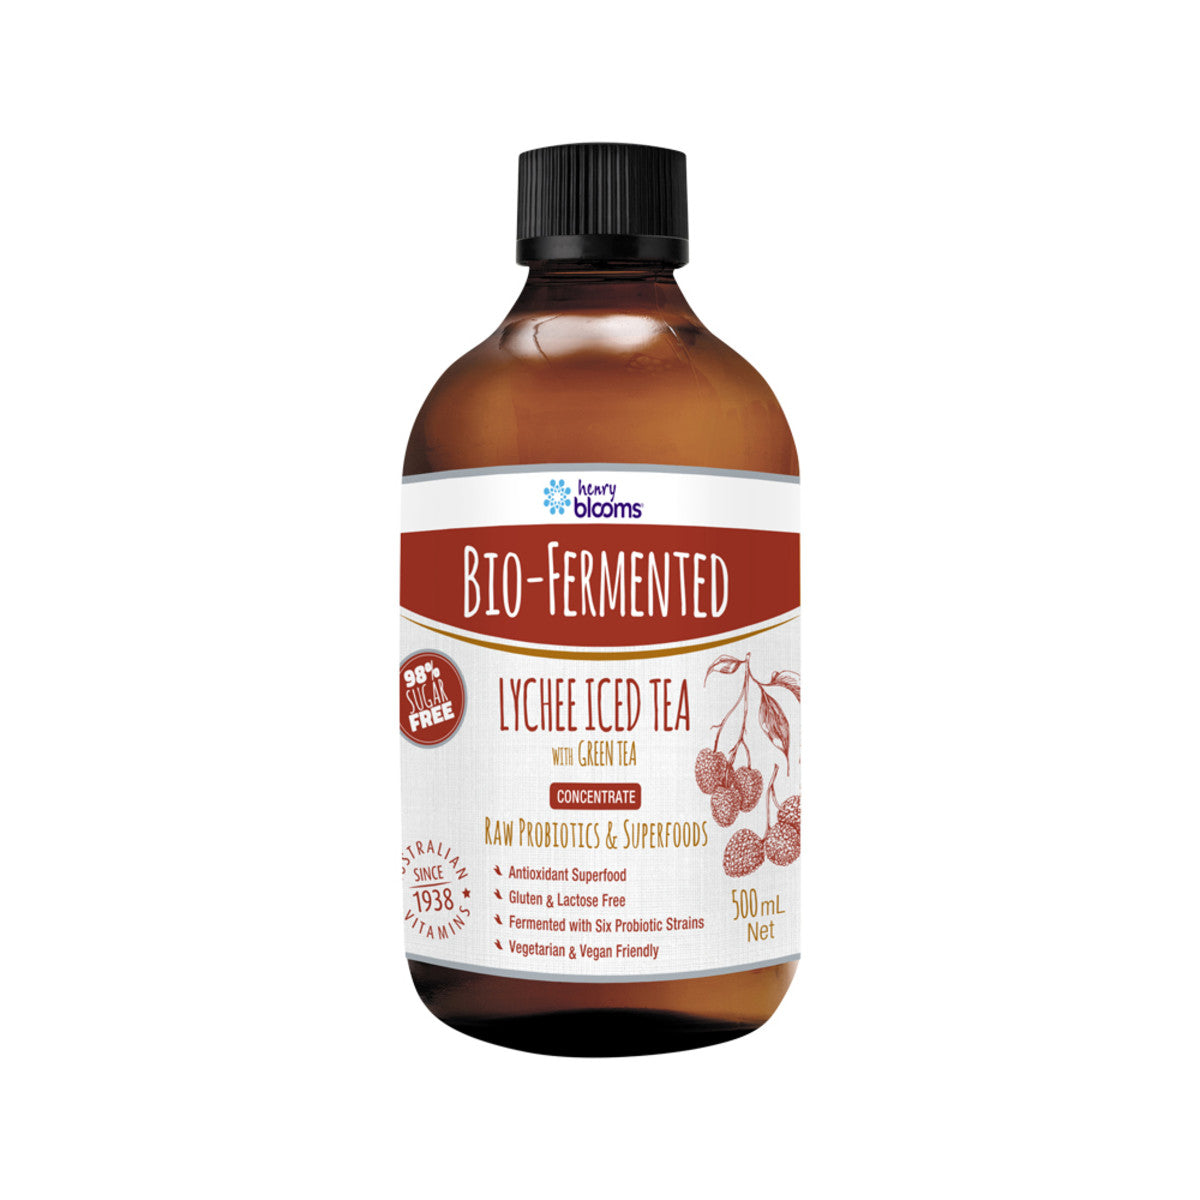 Henry Blooms - Bio Fermented Lychee Iced Tea Green Tea Concentrate